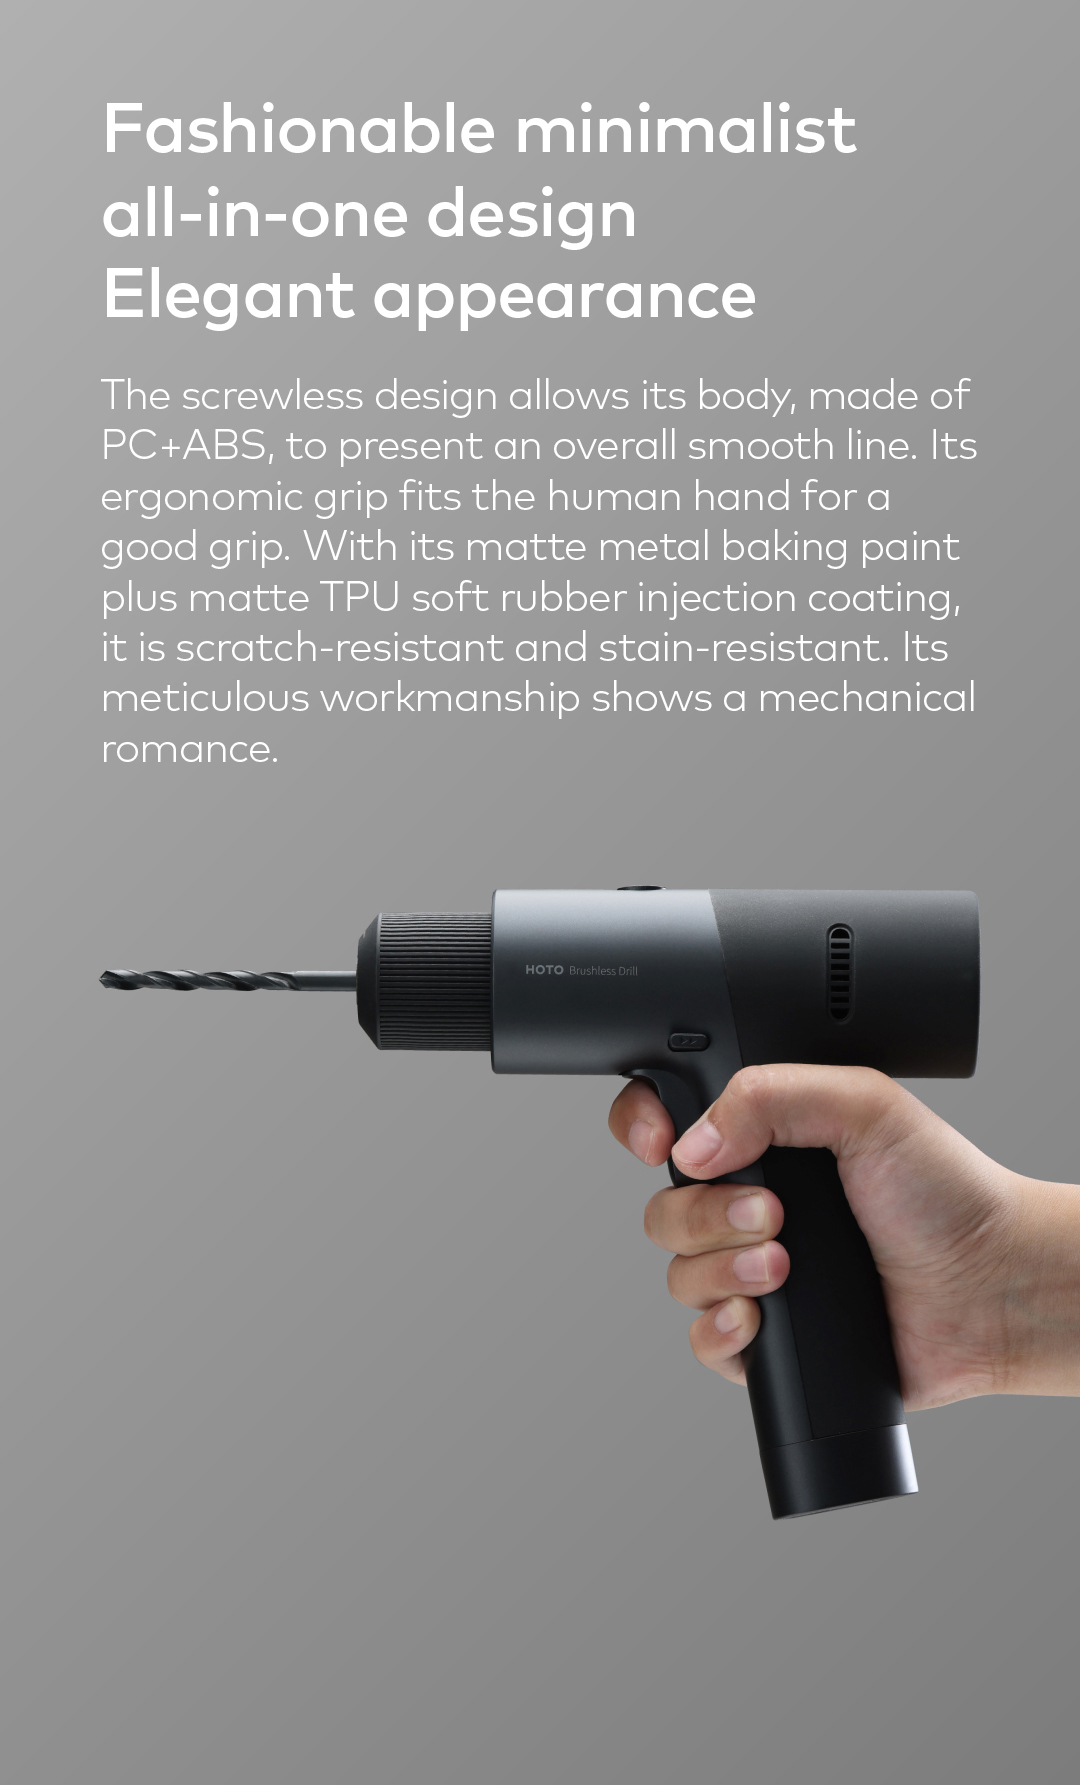 HOTO-Smart-Cordless-Electric-Drill-12V-Brushless-Driver-Drill-LED-Display-Li-ion-Battery-Power-Screw-1915218-5